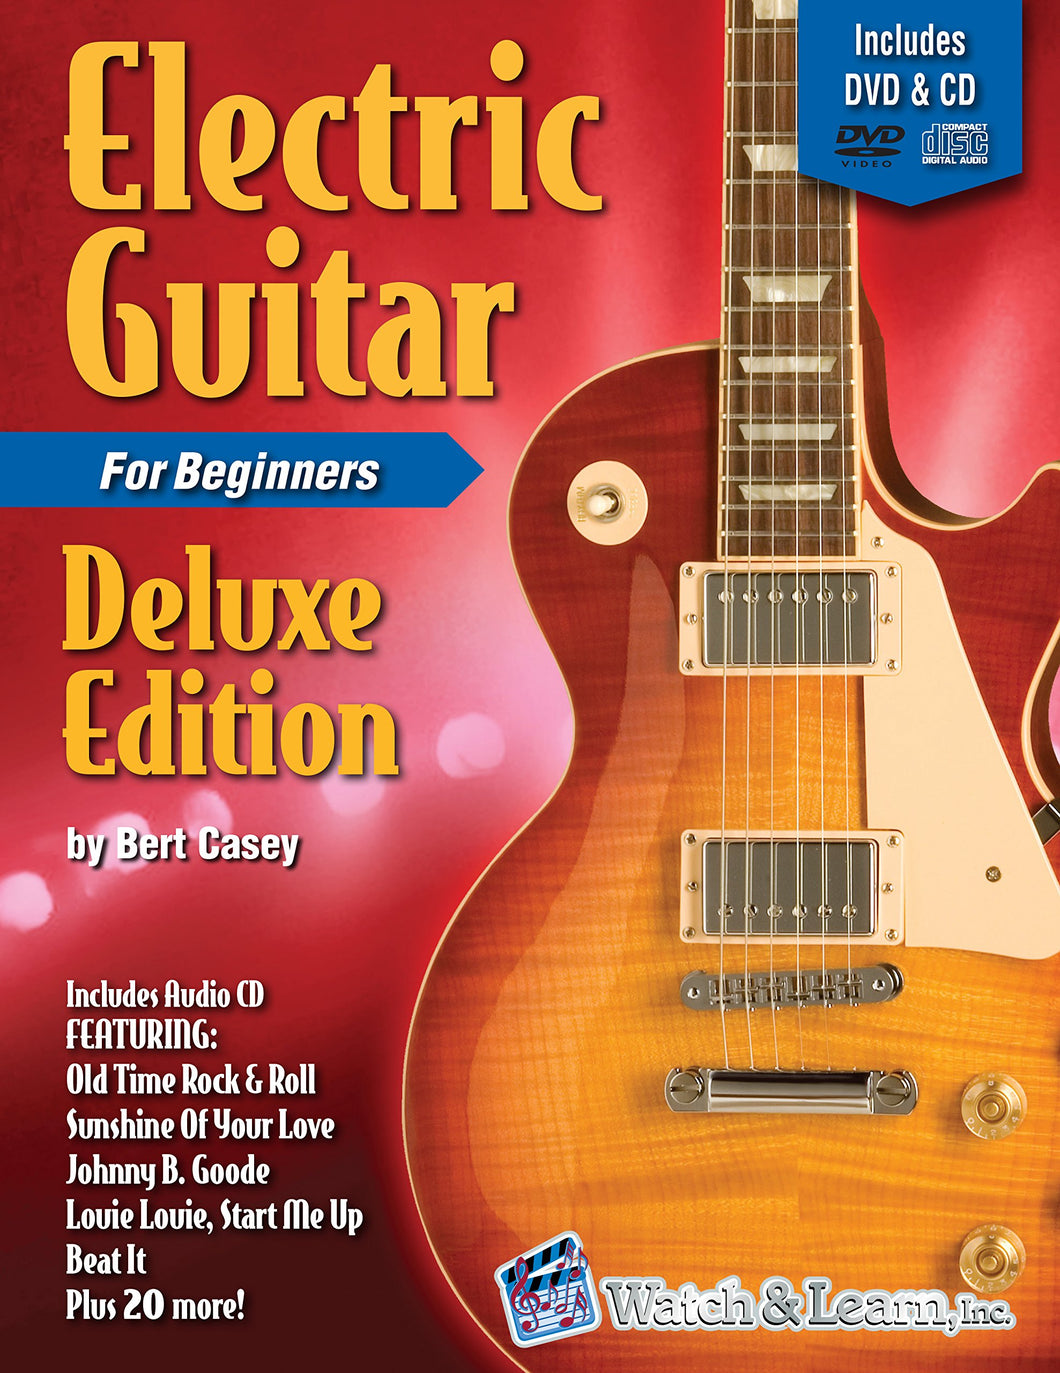 Watch & Learn Electric Guitar Book for Beginners with DVD & CD